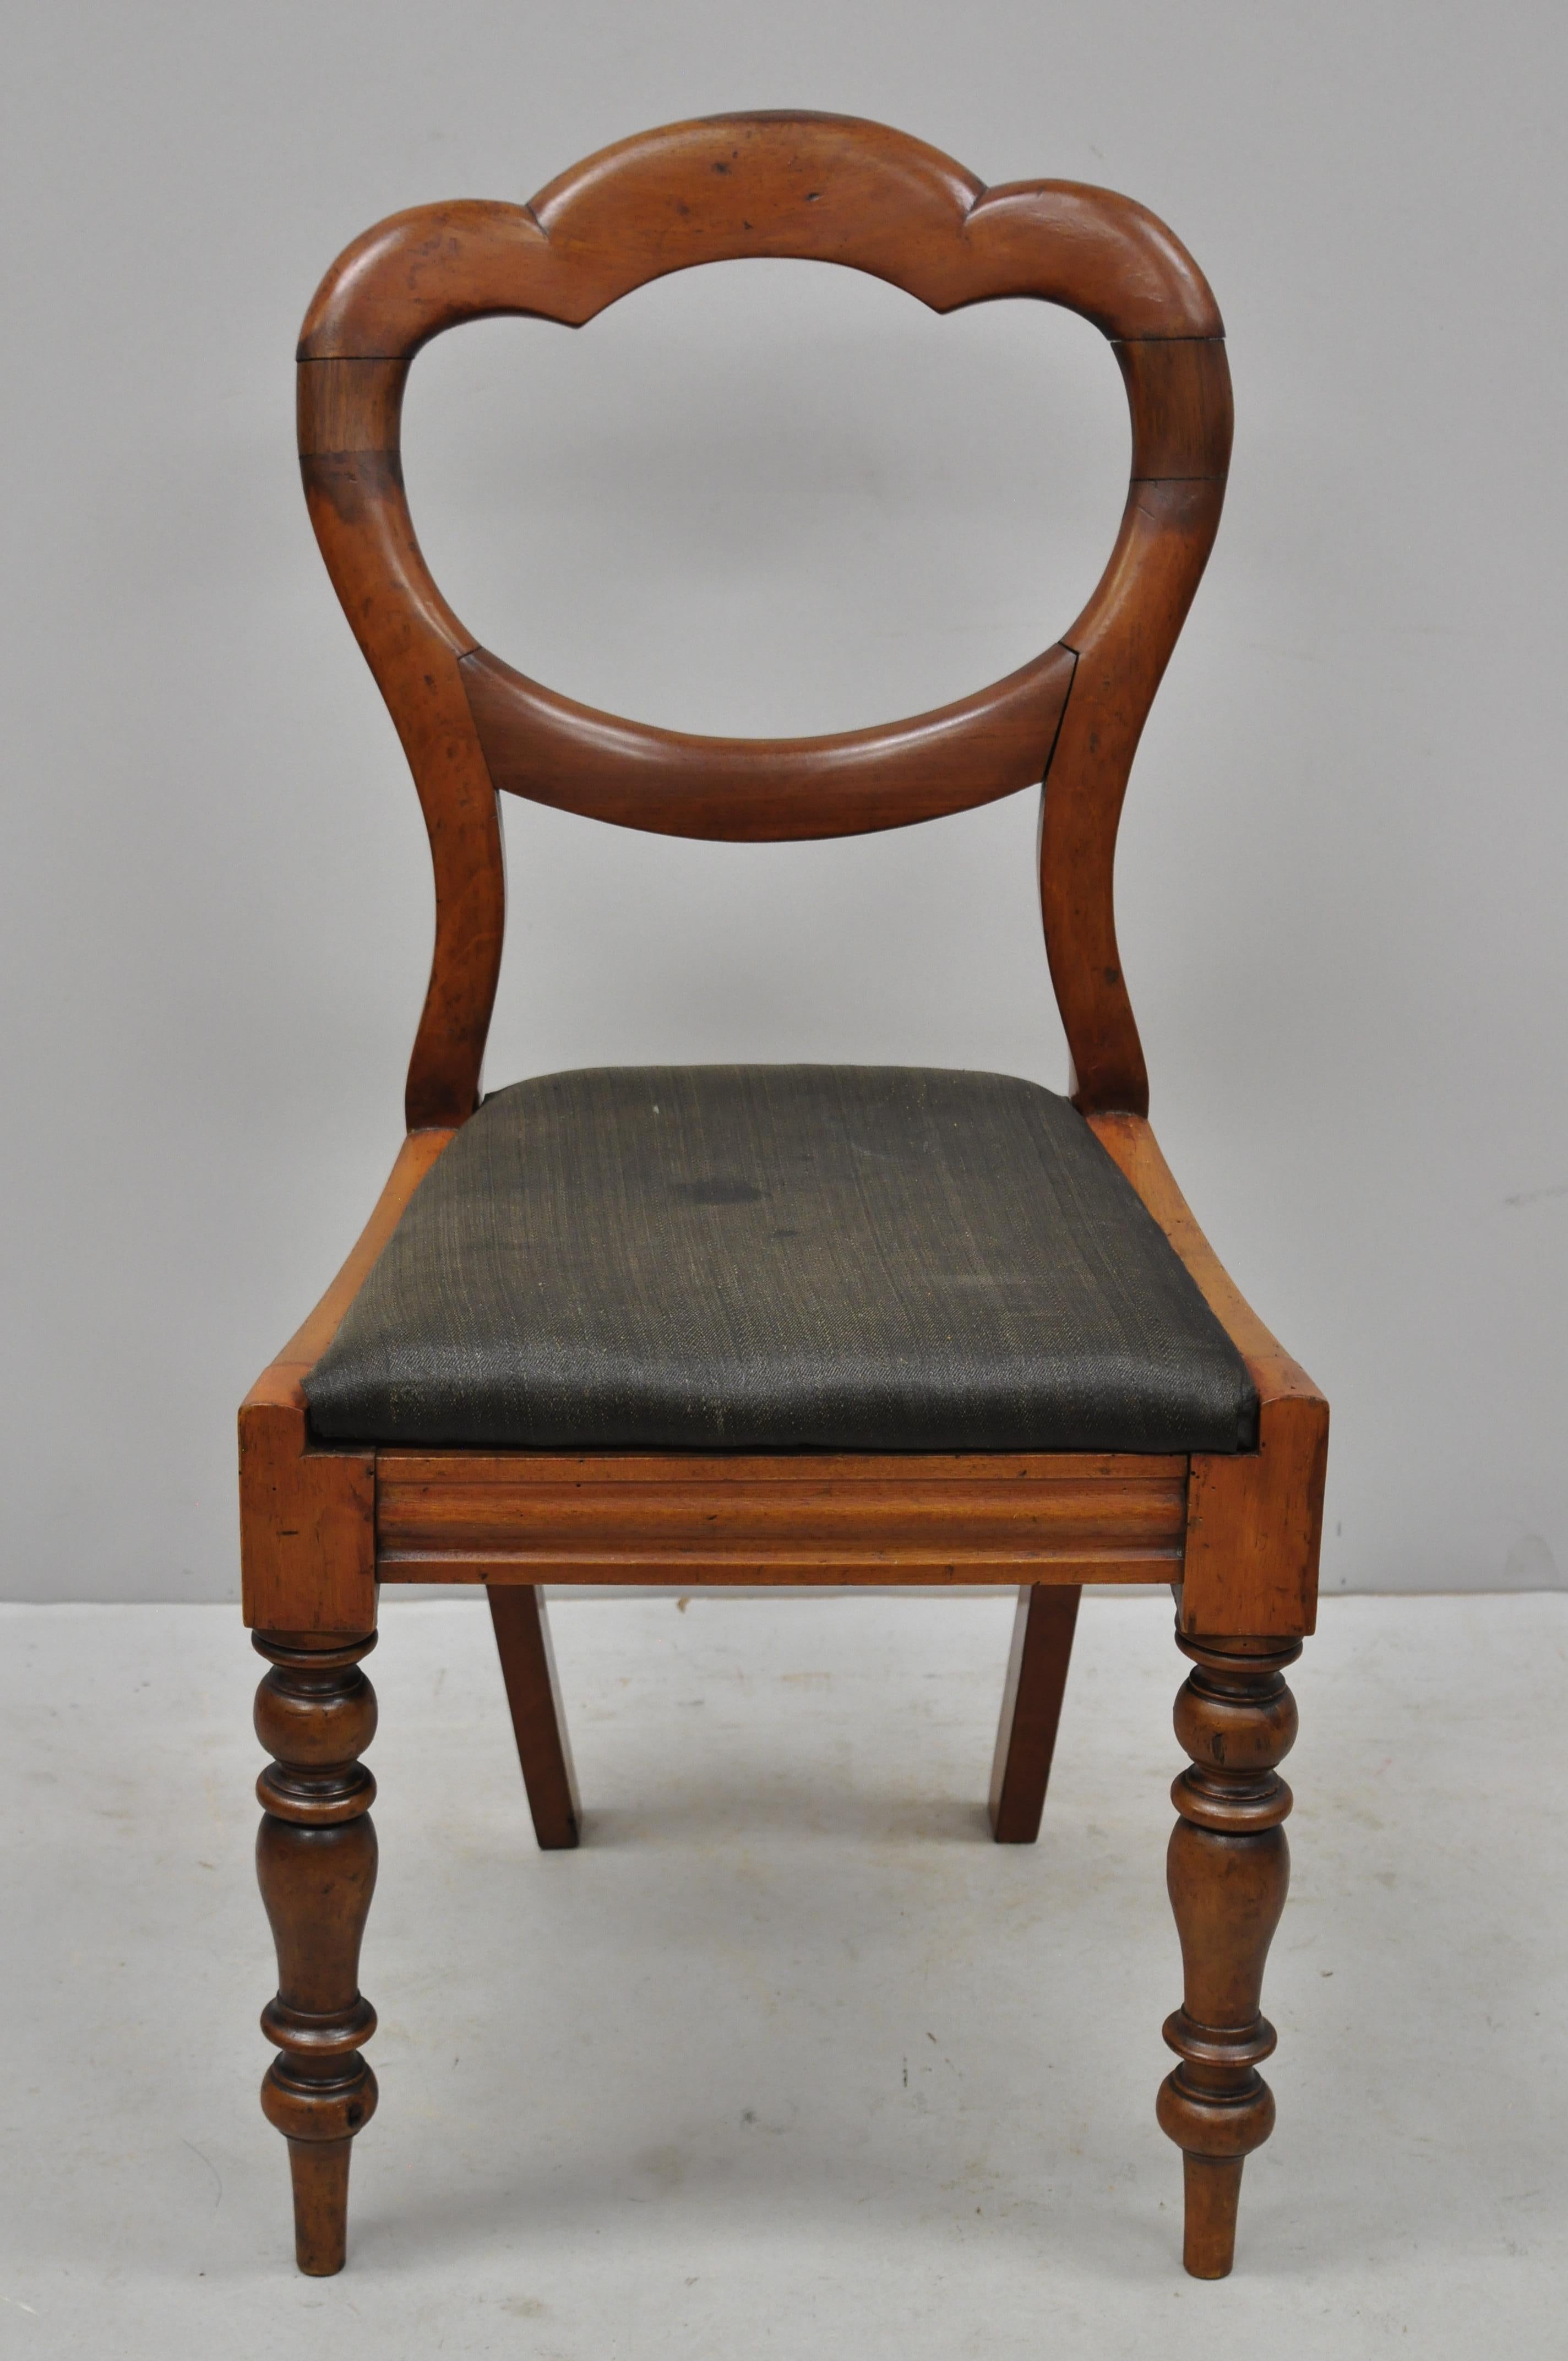 Antique 19th century English Victorian balloon back mahogany library side chair (A). Item features turn carved legs, drop seats, balloon backs, solid wood construction, beautiful wood grain, very nice antique item, circa 19th century. Measurements: